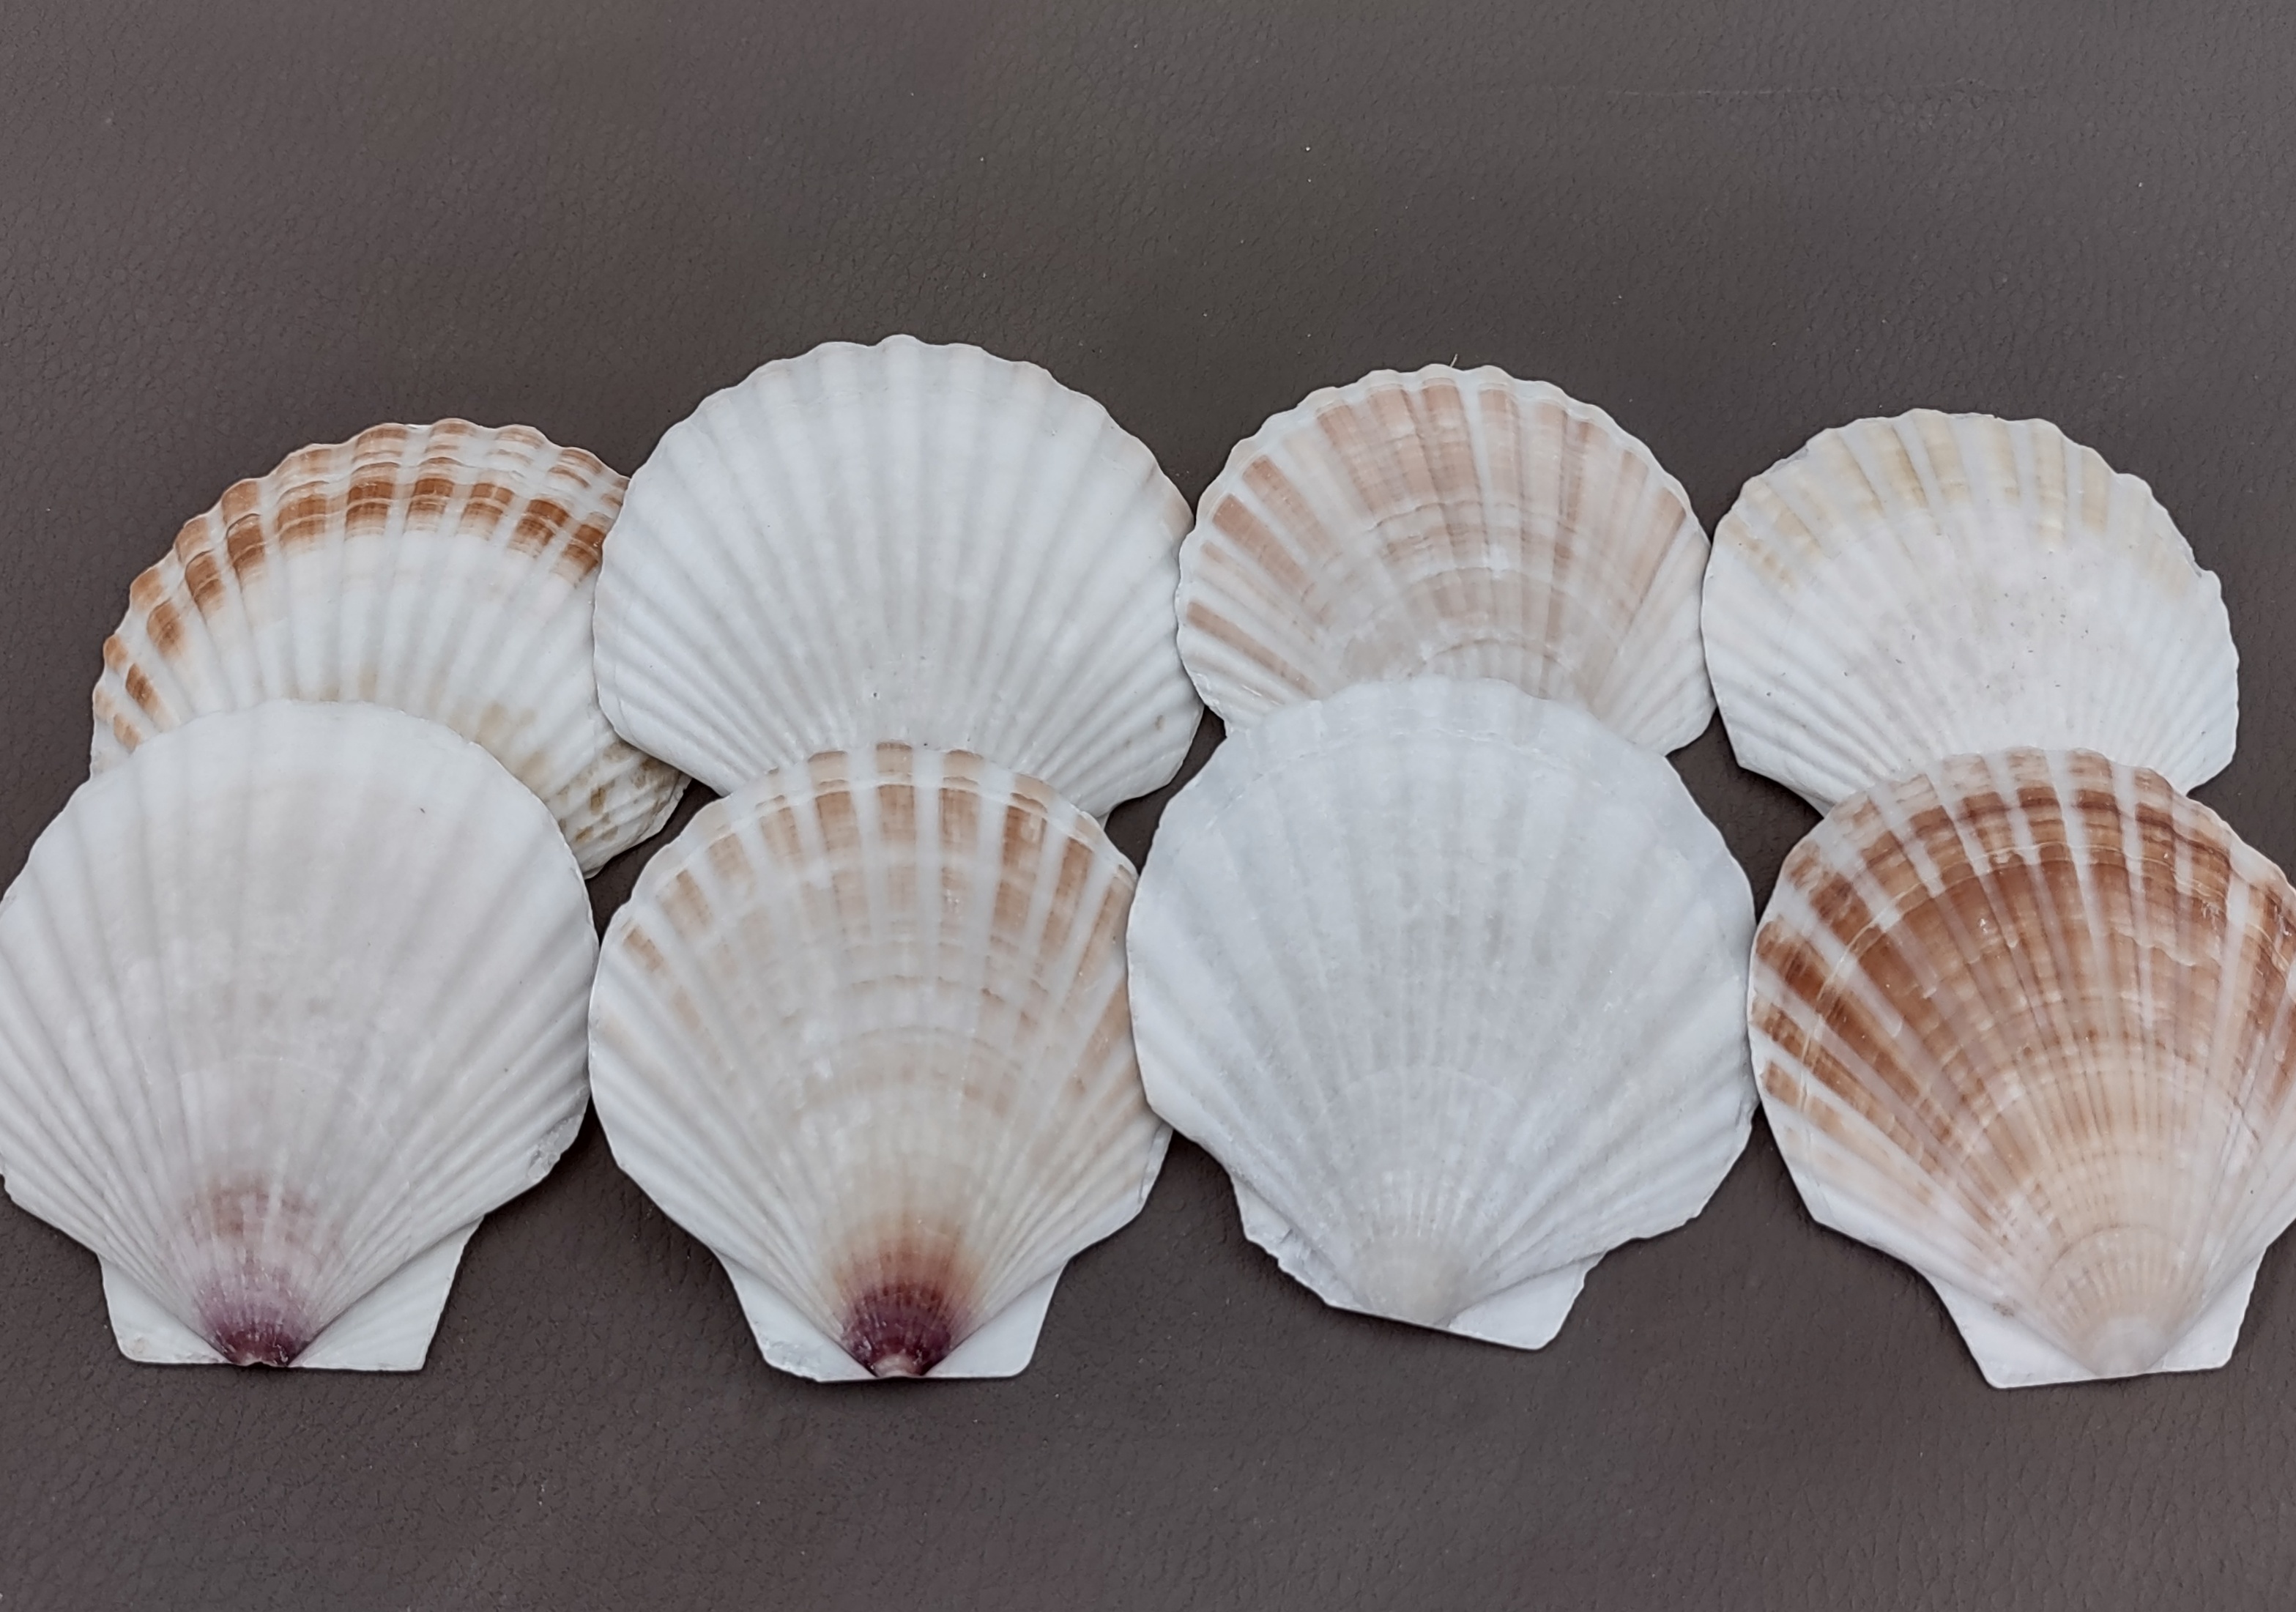 Small Scallop Baking Dish Seashells - Pecten Yessoensis - (8 shells approx.  2-2.5 inch) Perfect for Appetizer Dishes, Crafts, Art Projects